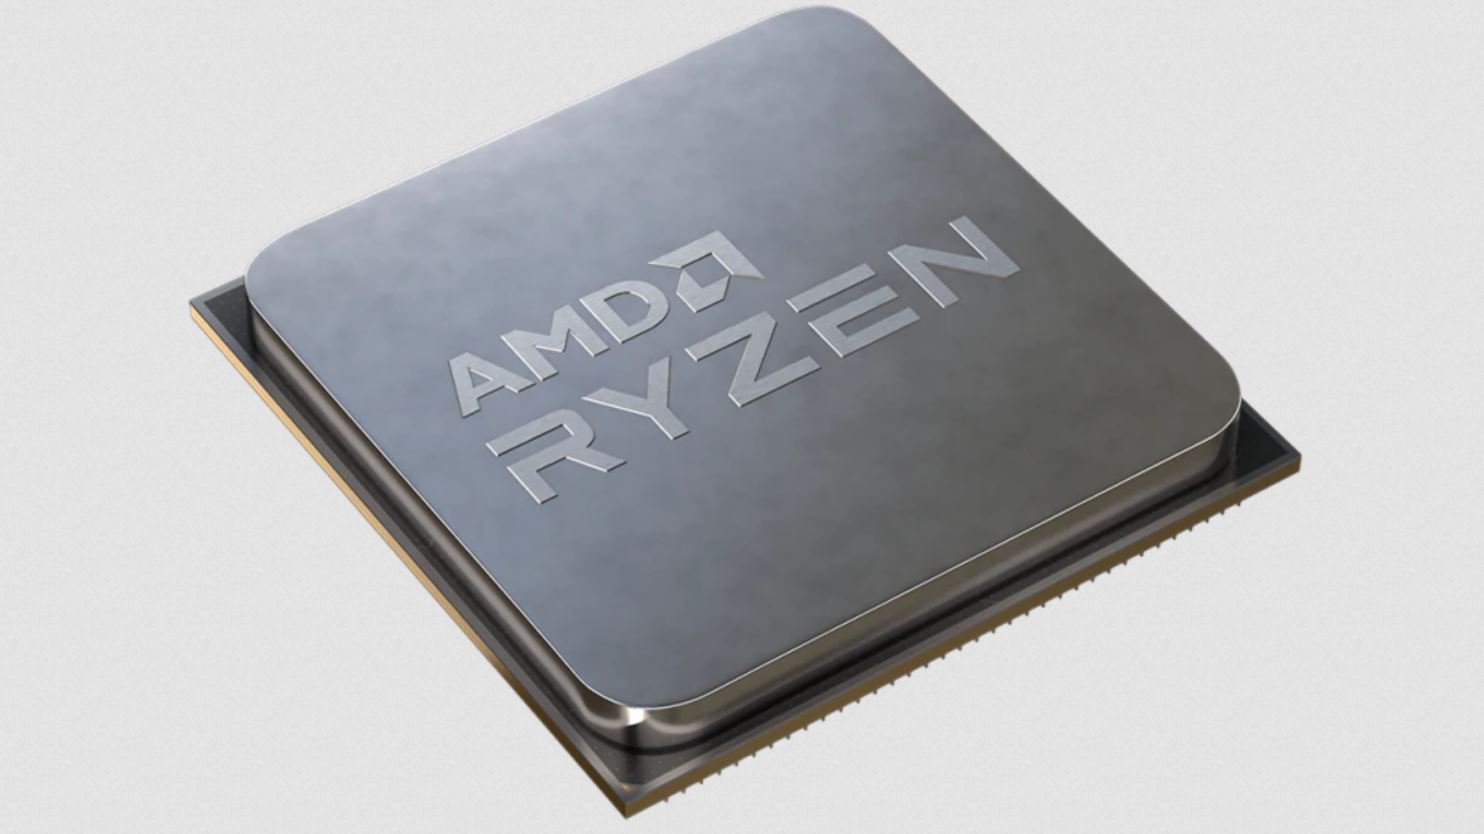 Media asset in full size related to 3dfxzone.it news item entitled as follows: AMD lancia le CPU Ryzen 9 5950X, 5900X, Ryzen 7 5800X e Ryzen 5 5600X | Image Name: news31191_AMD-Ryzen-5000_1.jpg